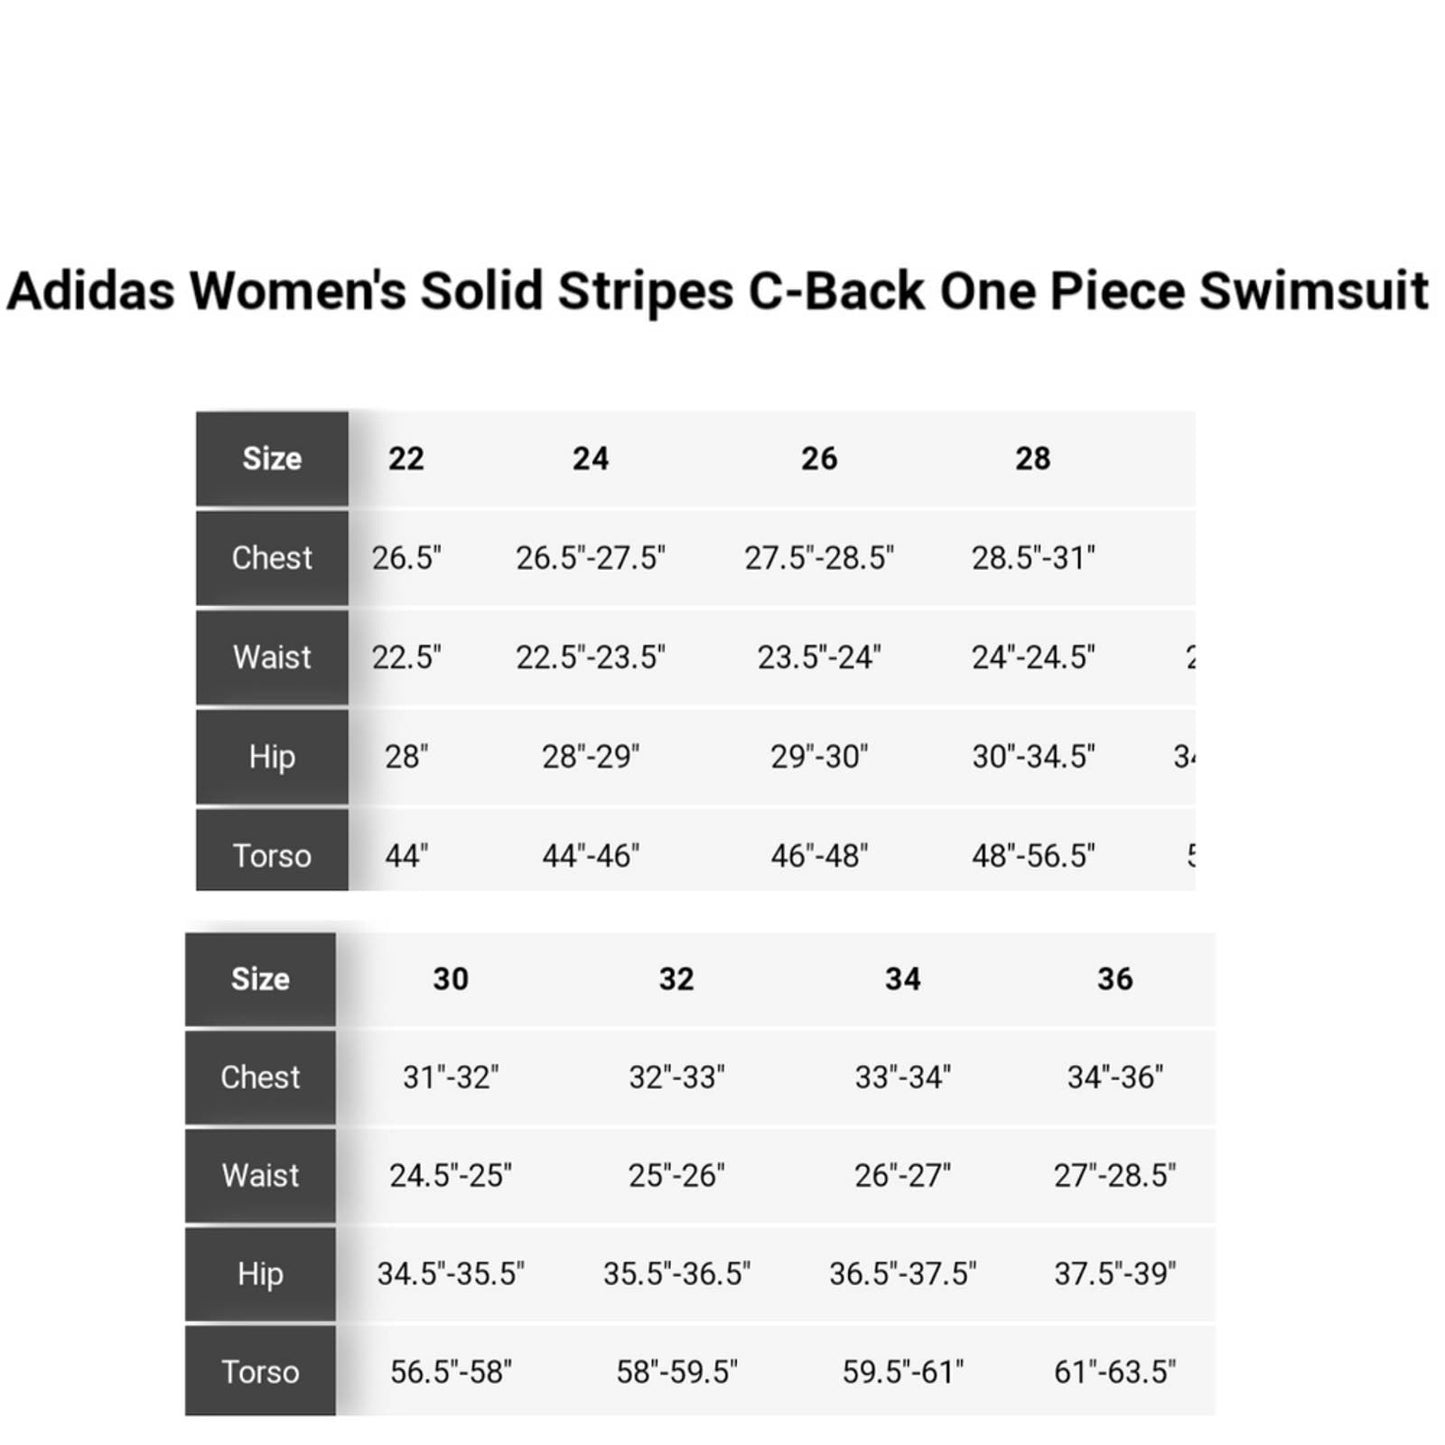 Adidas Solid Stripes C - Back One Piece Swimsuit